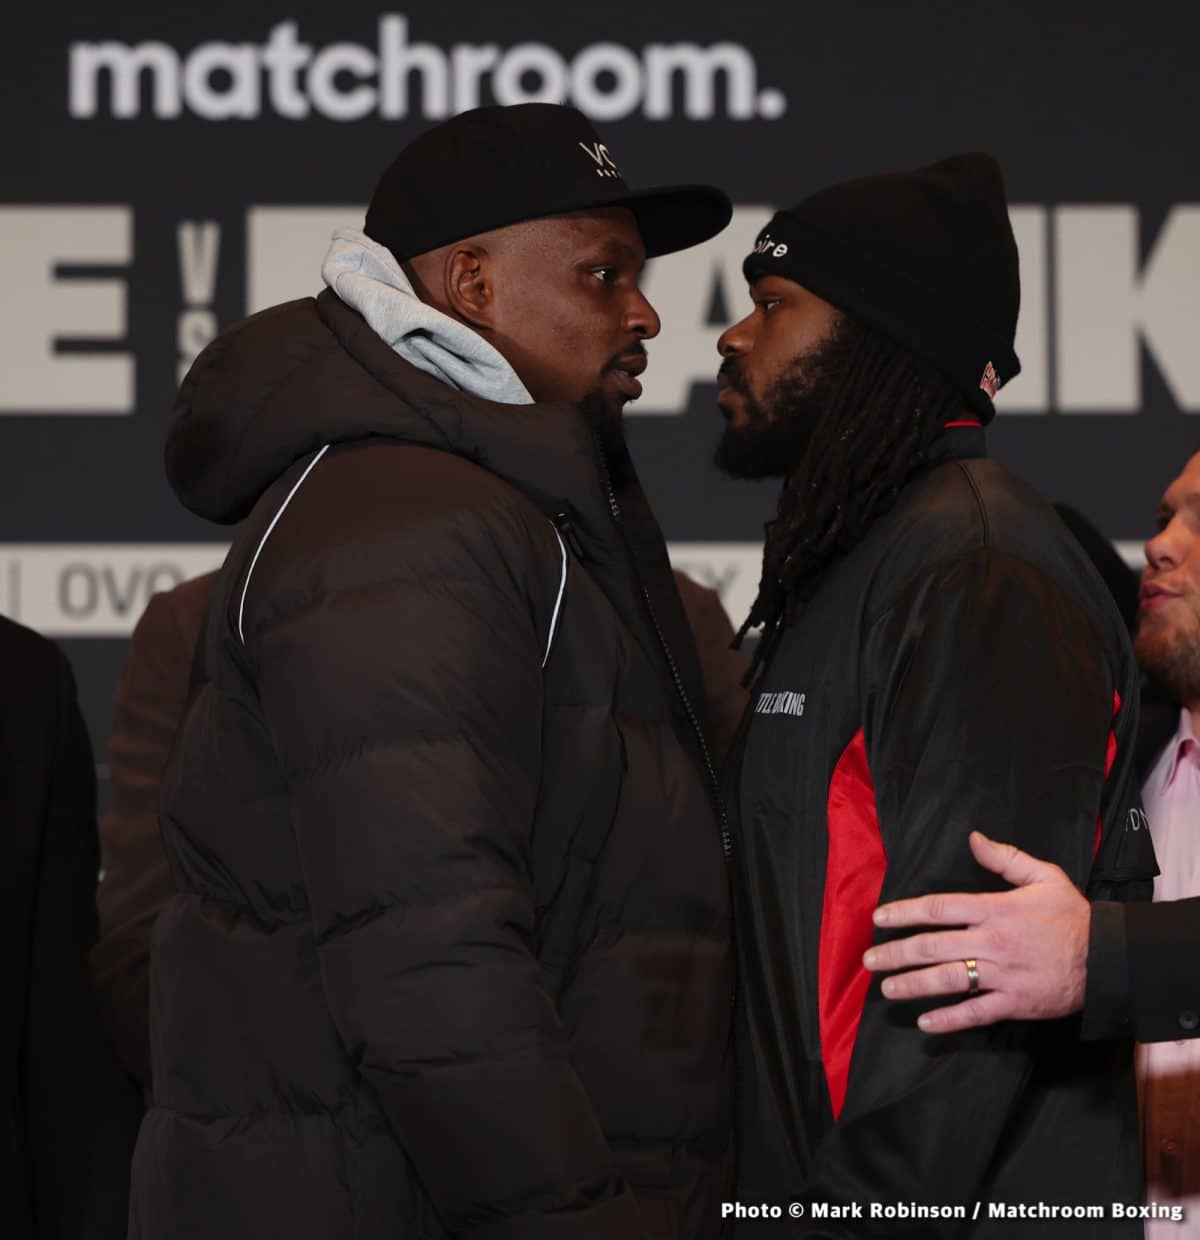 Image: Eddie Hearn: "I expect Dillian Whyte to win" by knockout against Jermaine Franklin